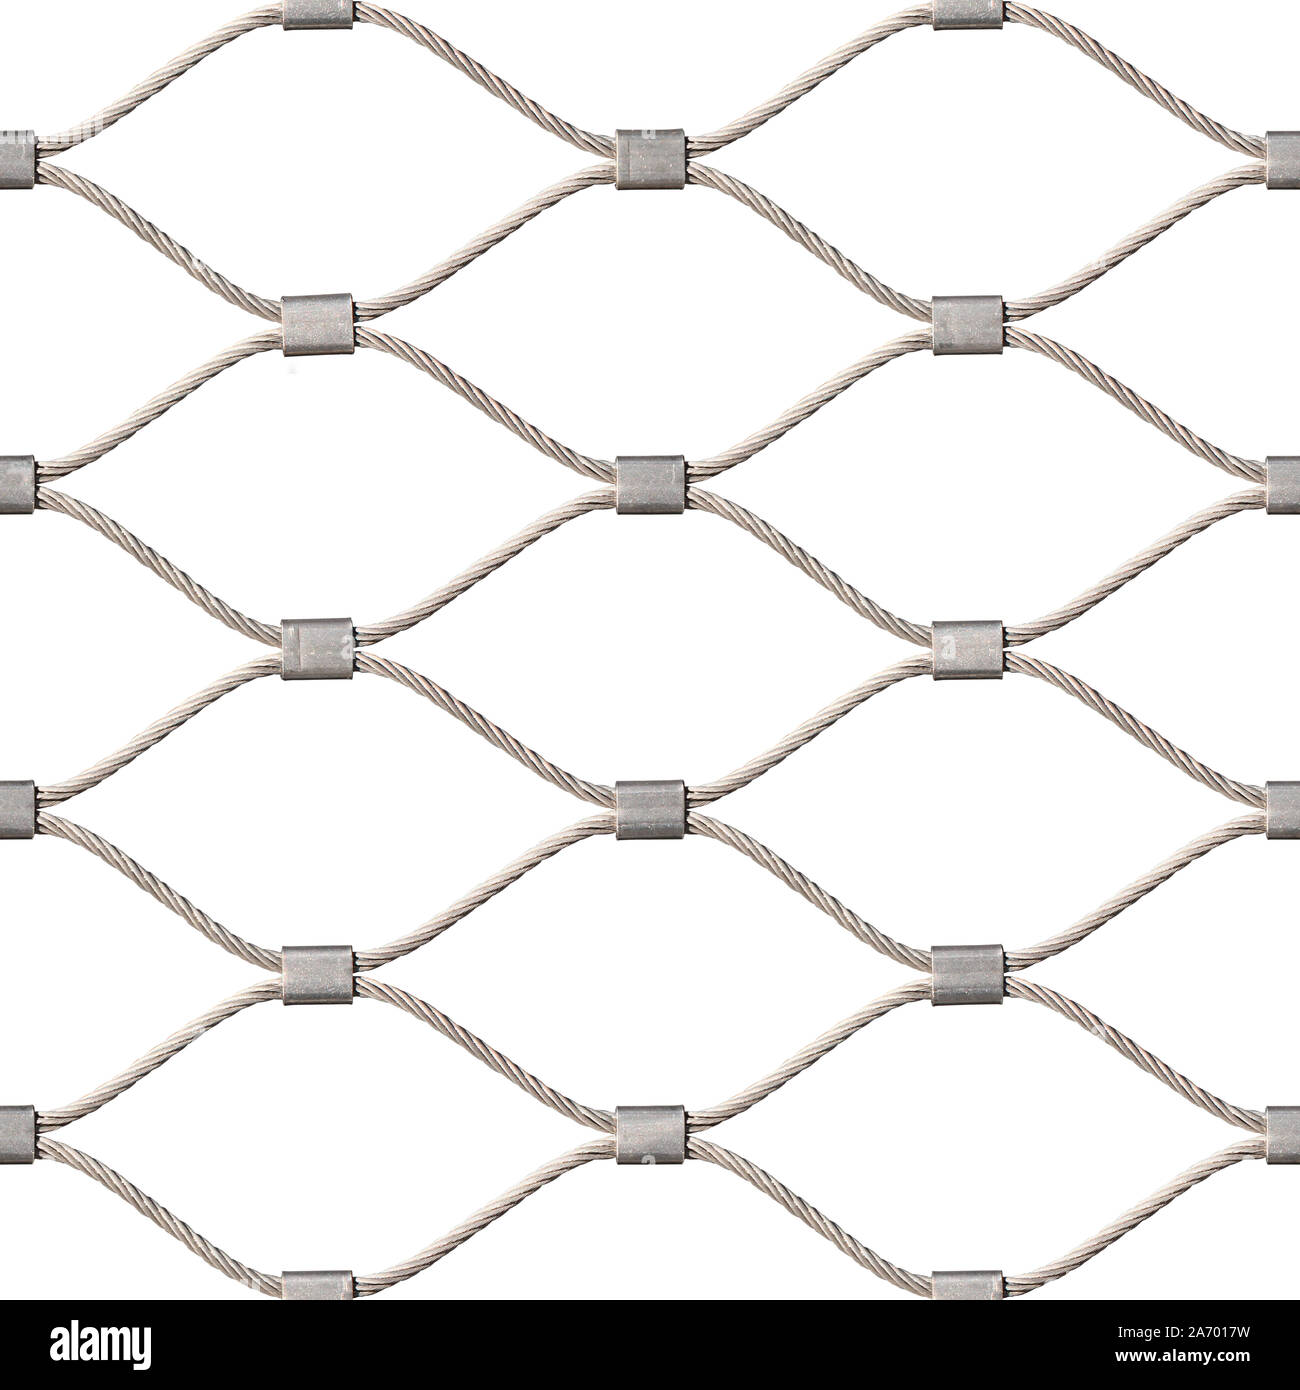 Stainless Steel Cable Mesh, Inter-Woven Type